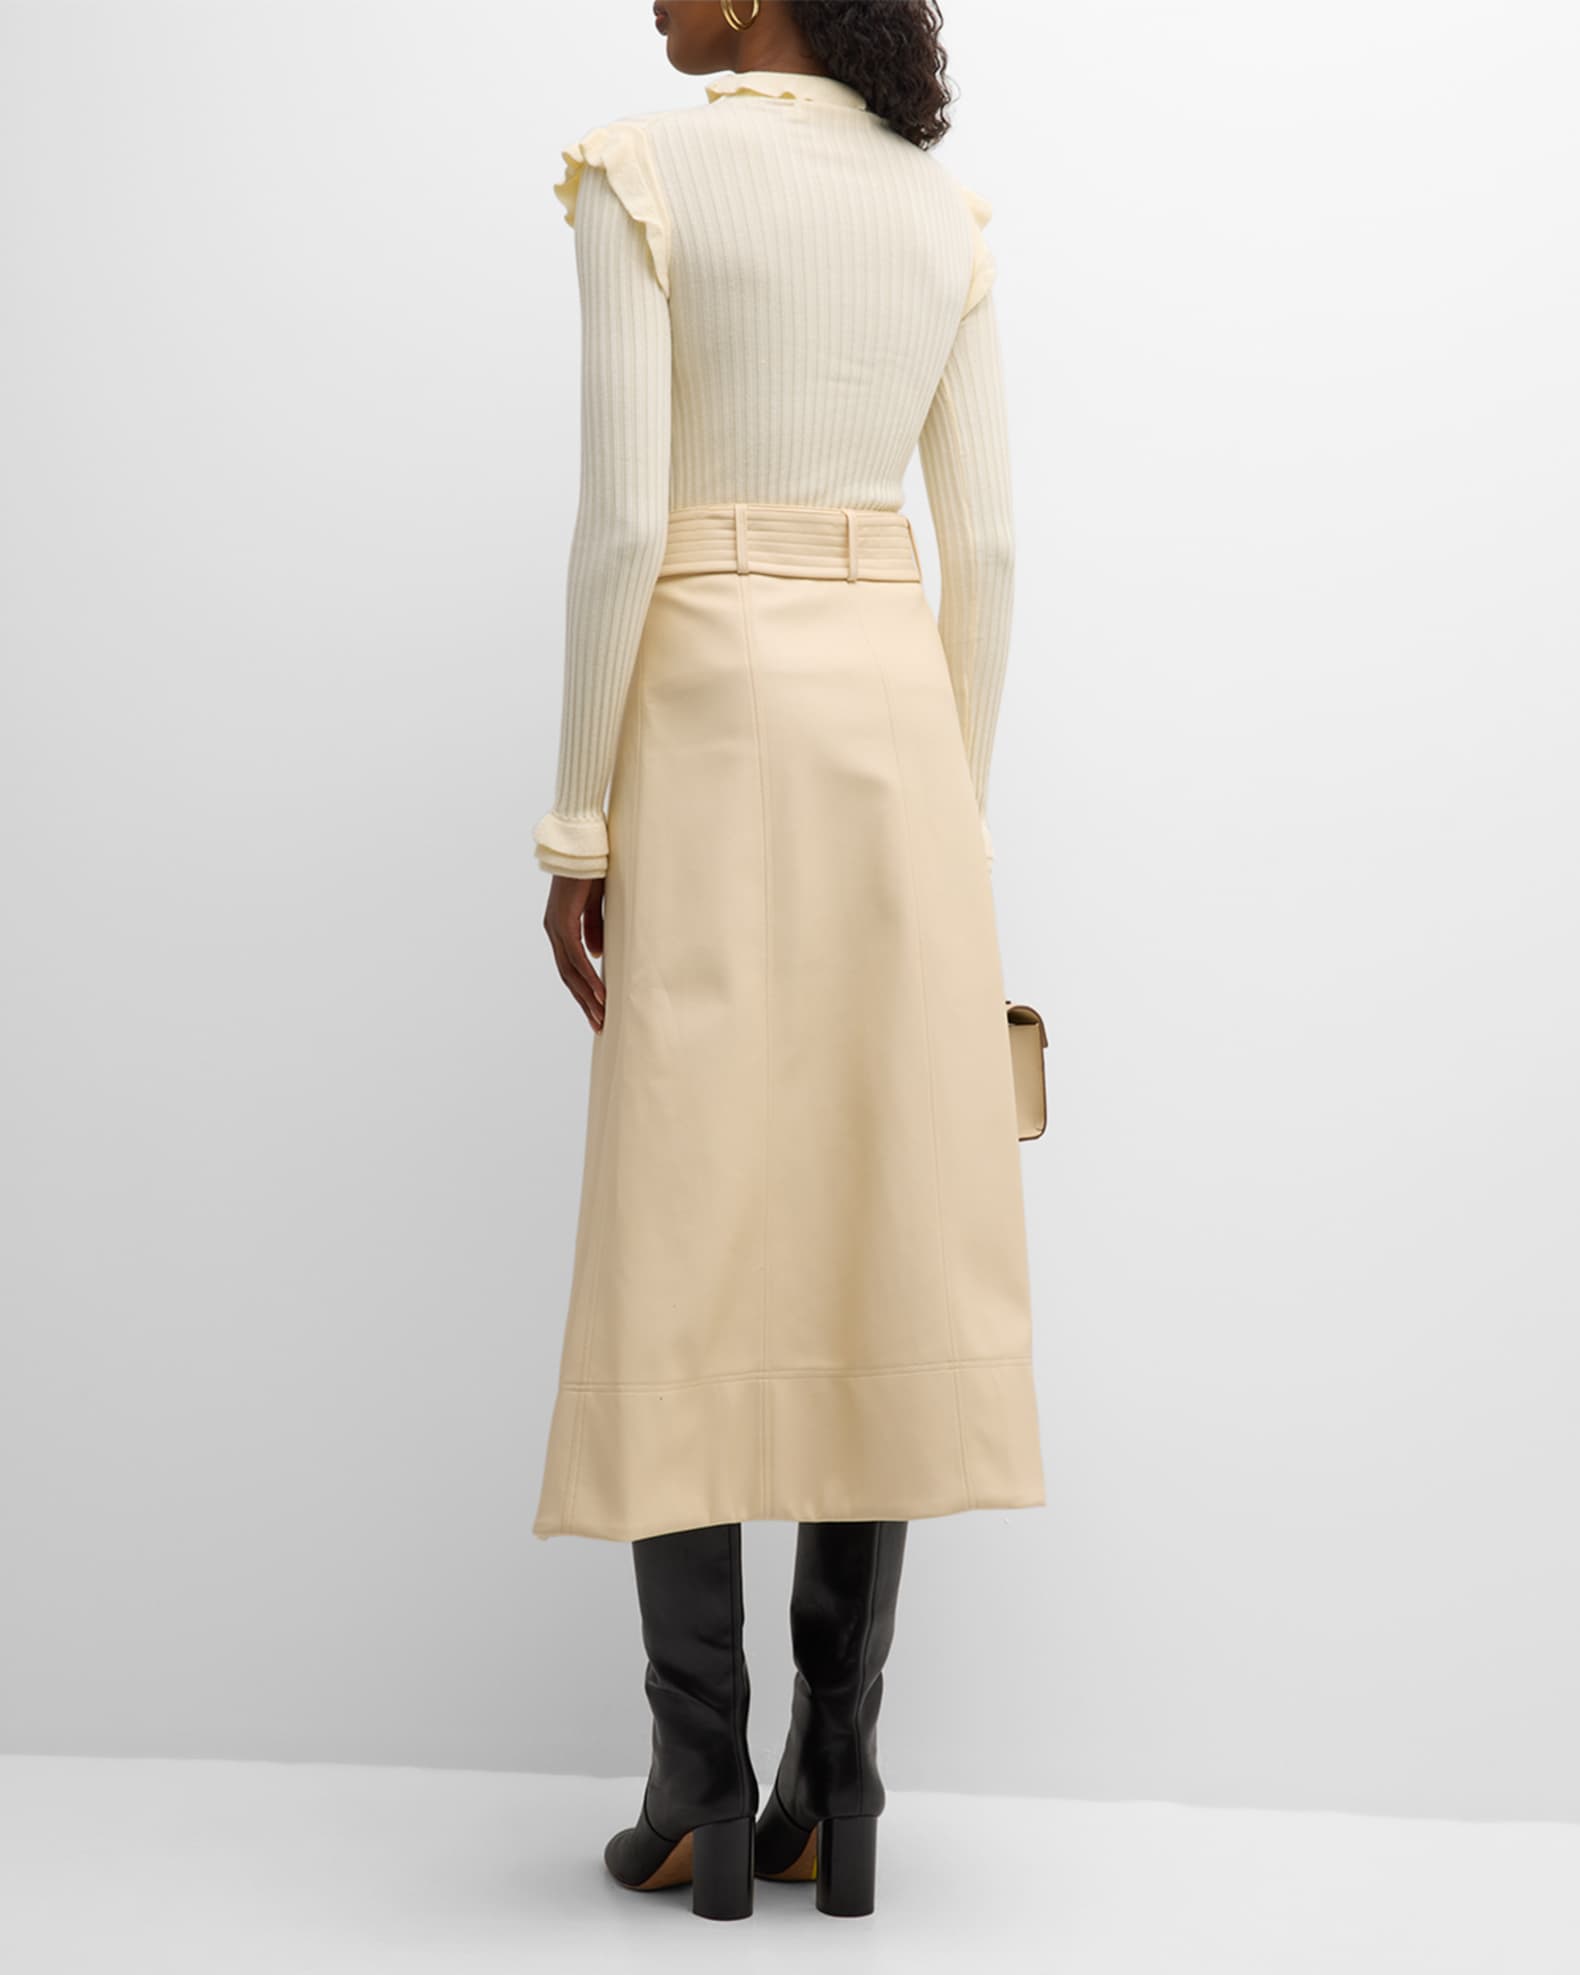 Marie Oliver Tinley Ribbed Mock-Neck Ruffle-Trim Sweater | Neiman Marcus